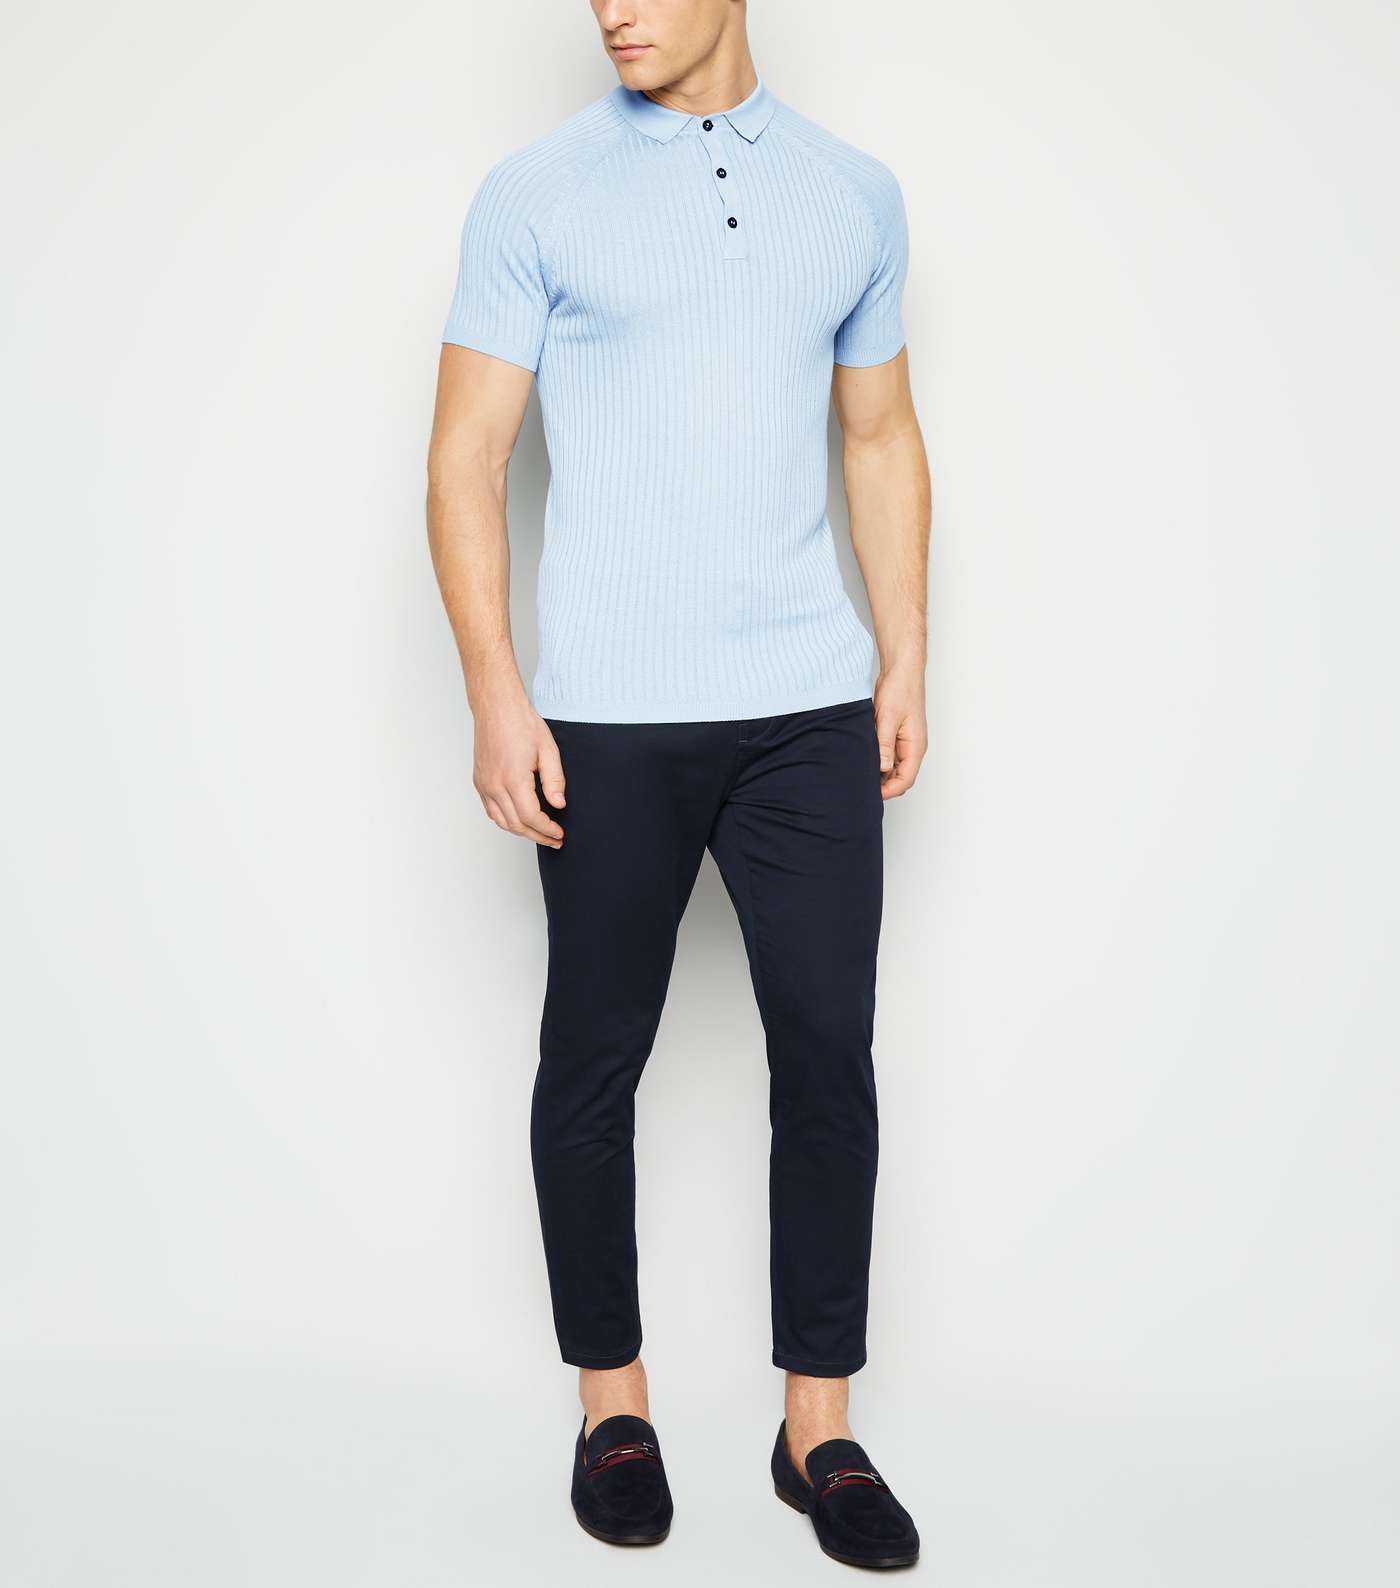 Pale Blue Knit Muscle Fit Polo Shirt Image 2